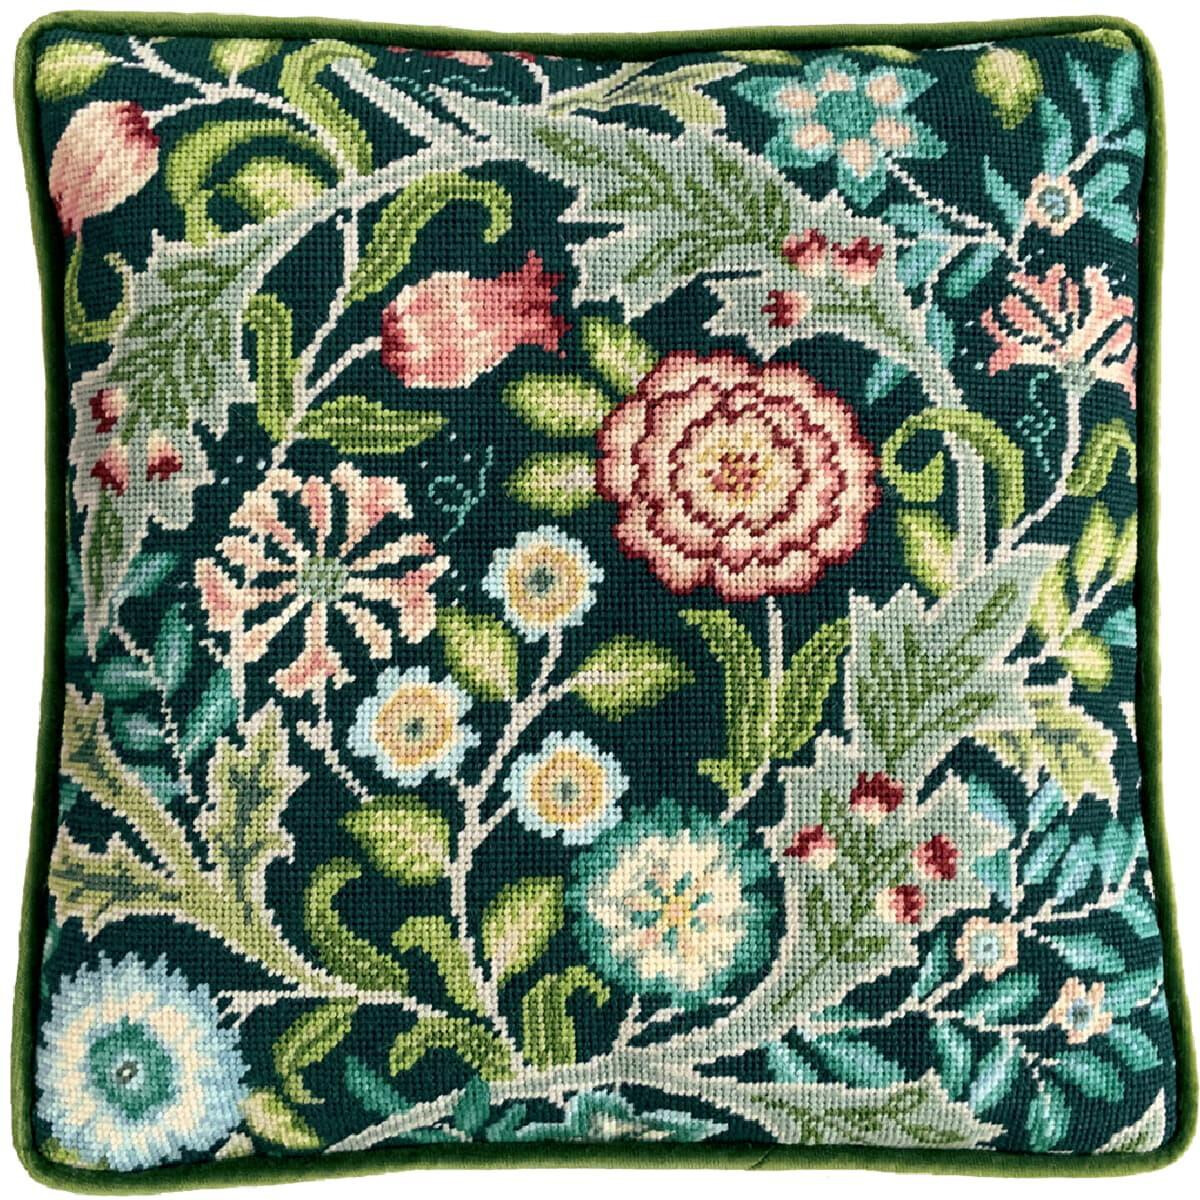 A square, intricately embroidered cushion with a floral...